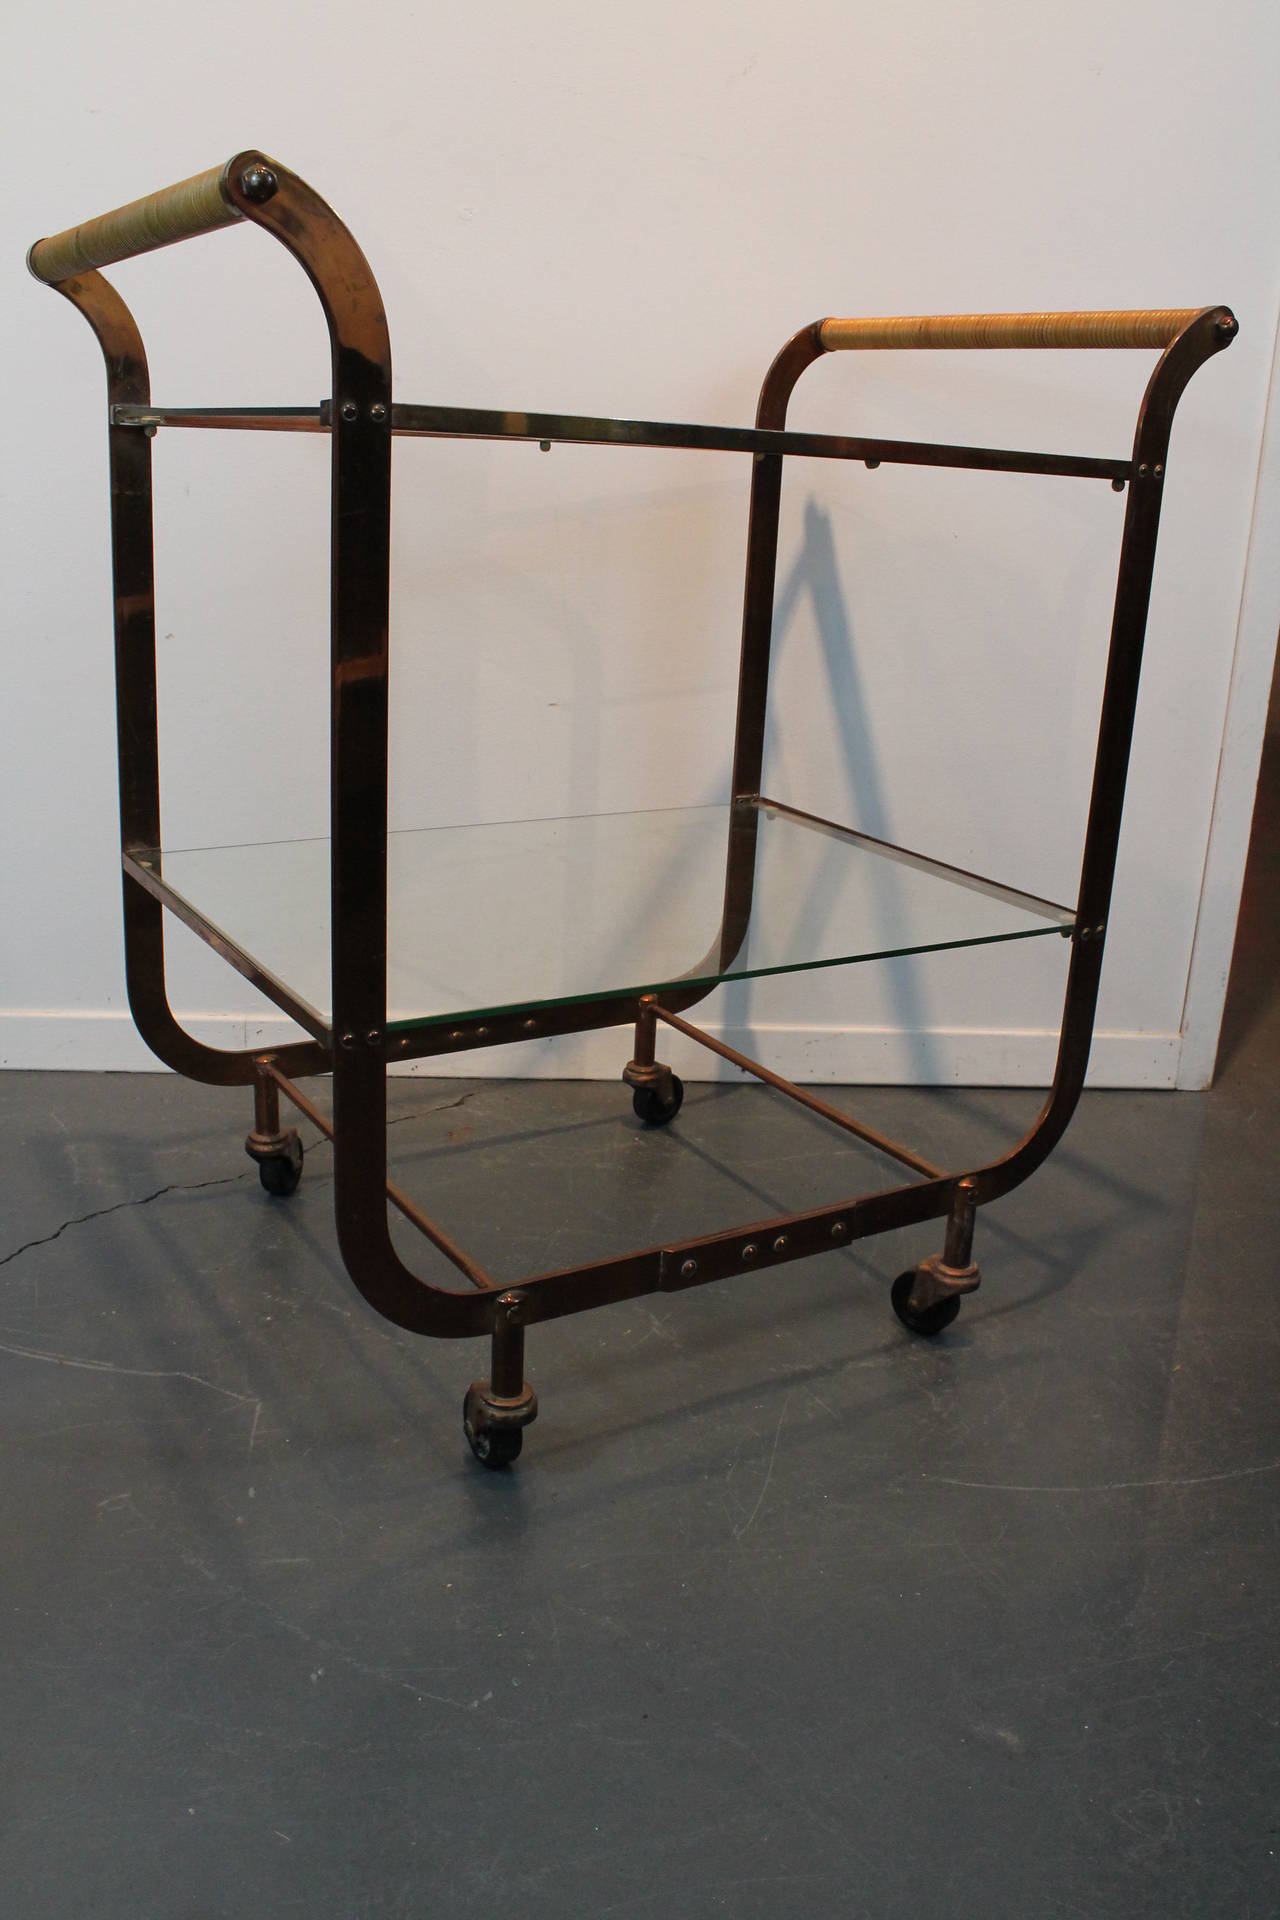 Amazing Art Deco bar cart in copper with rattan wrapped handles.
2 tiered glass shelves with brass casters.